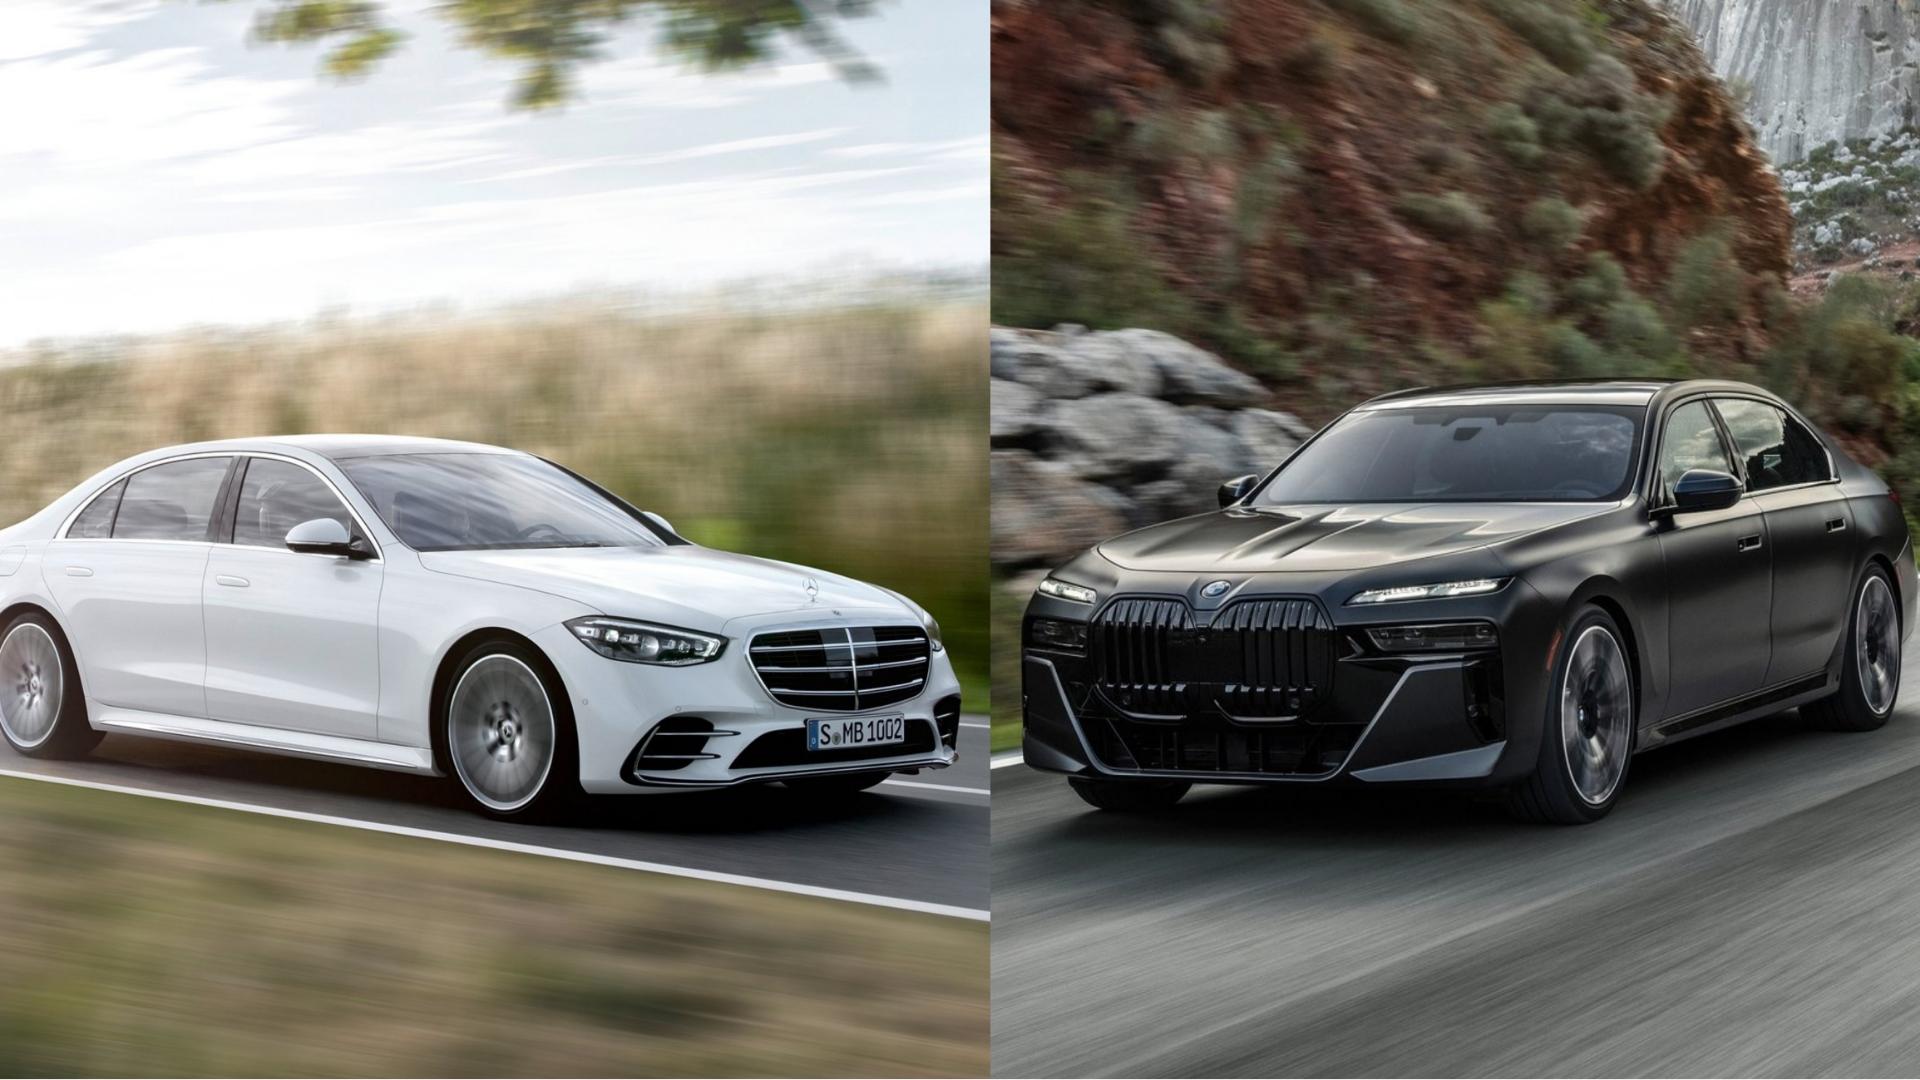 DubiCompare: Mercedes-Benz S-Class v/s BMW 7-Series: The Battle Of The Ultimate German Luxury Saloons